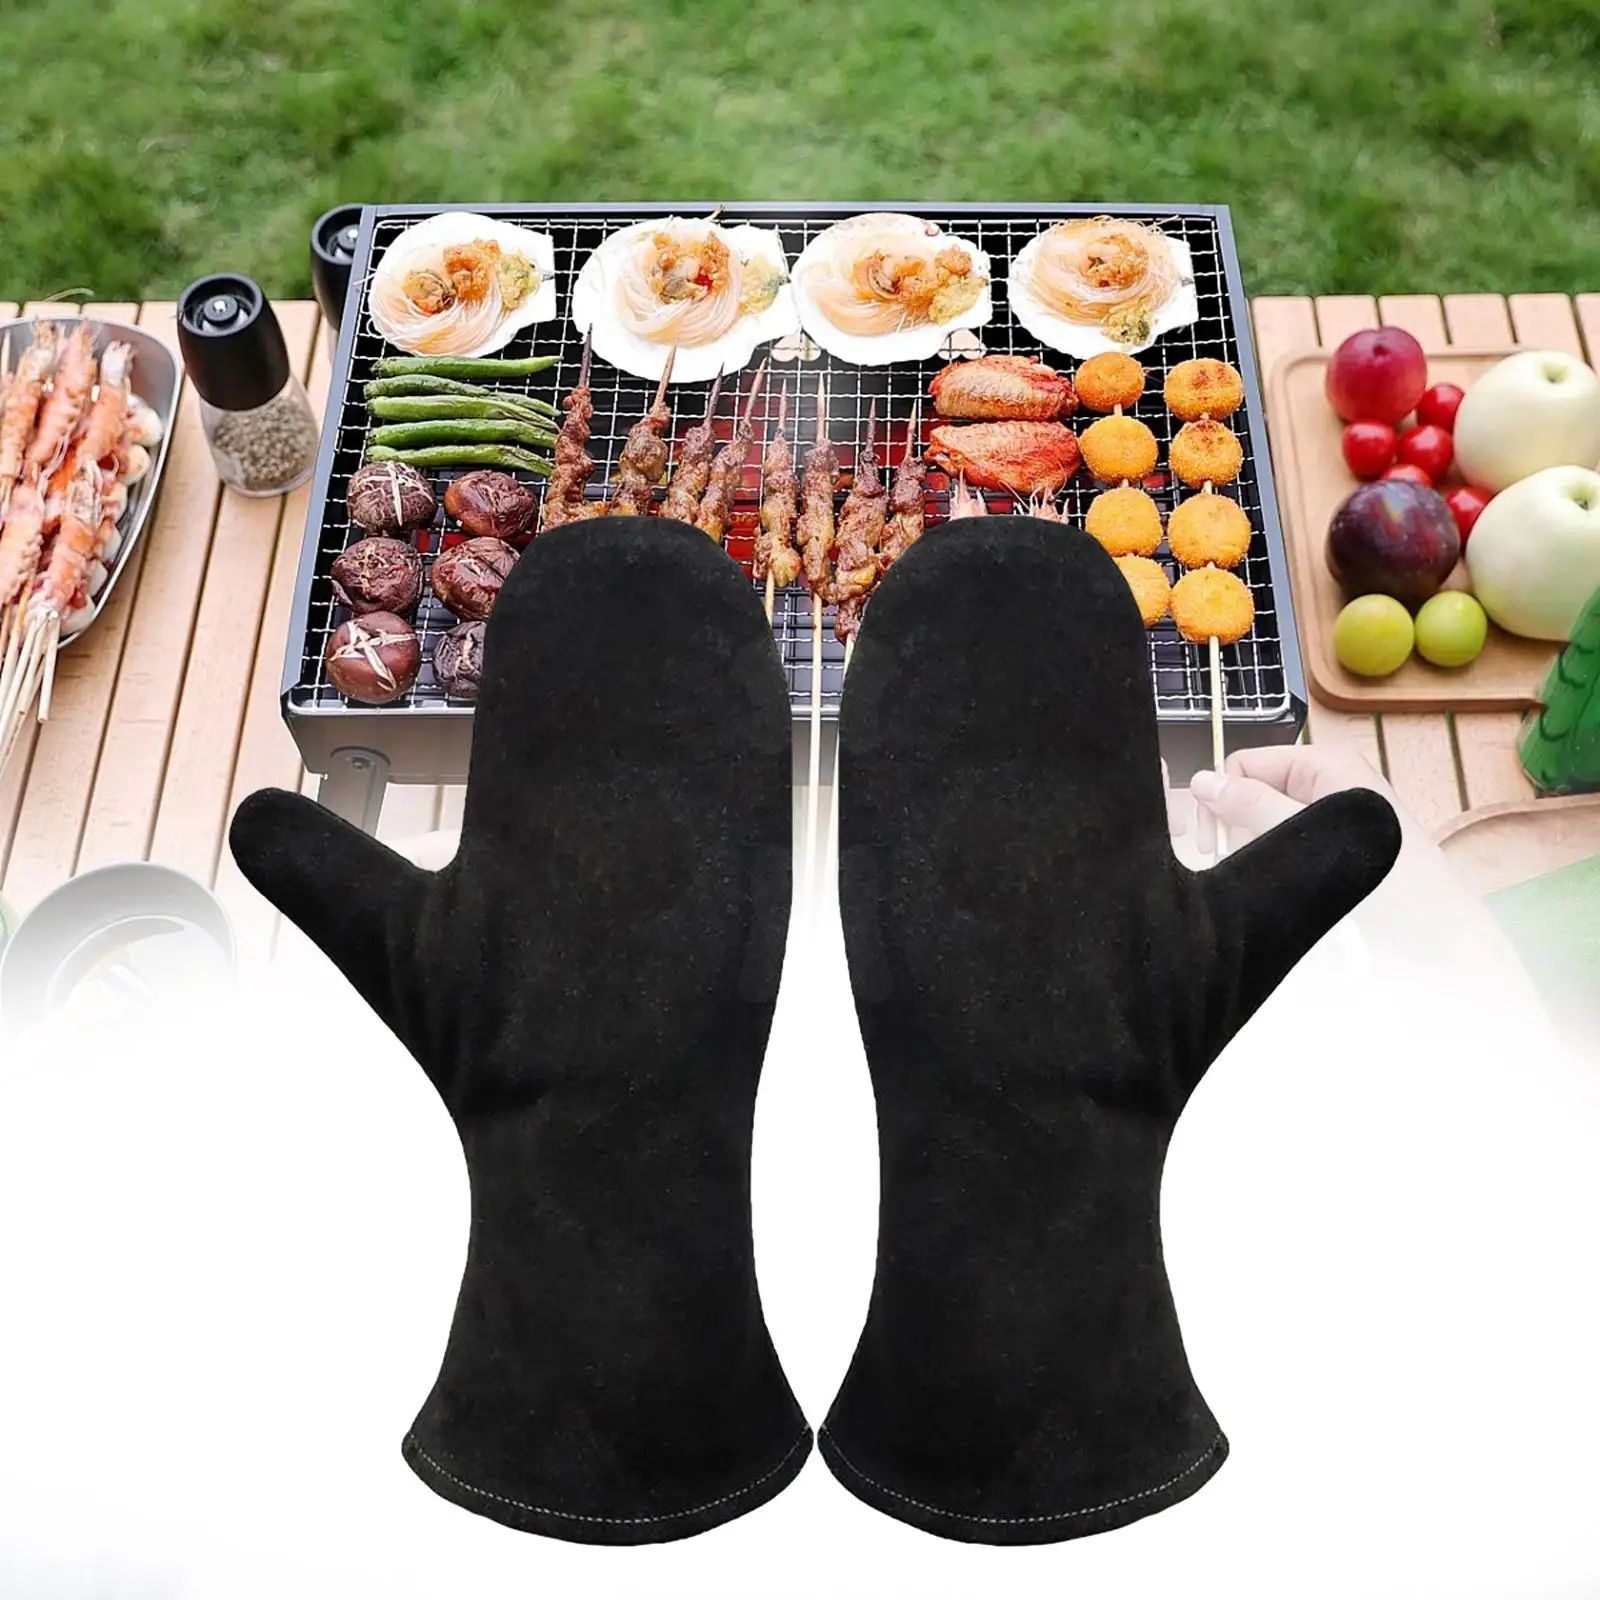 Heat Resistant Protection Gloves High Temperature Heat Resistant Fireproof Gauntlets for Grill Firepit Gardening Bbq